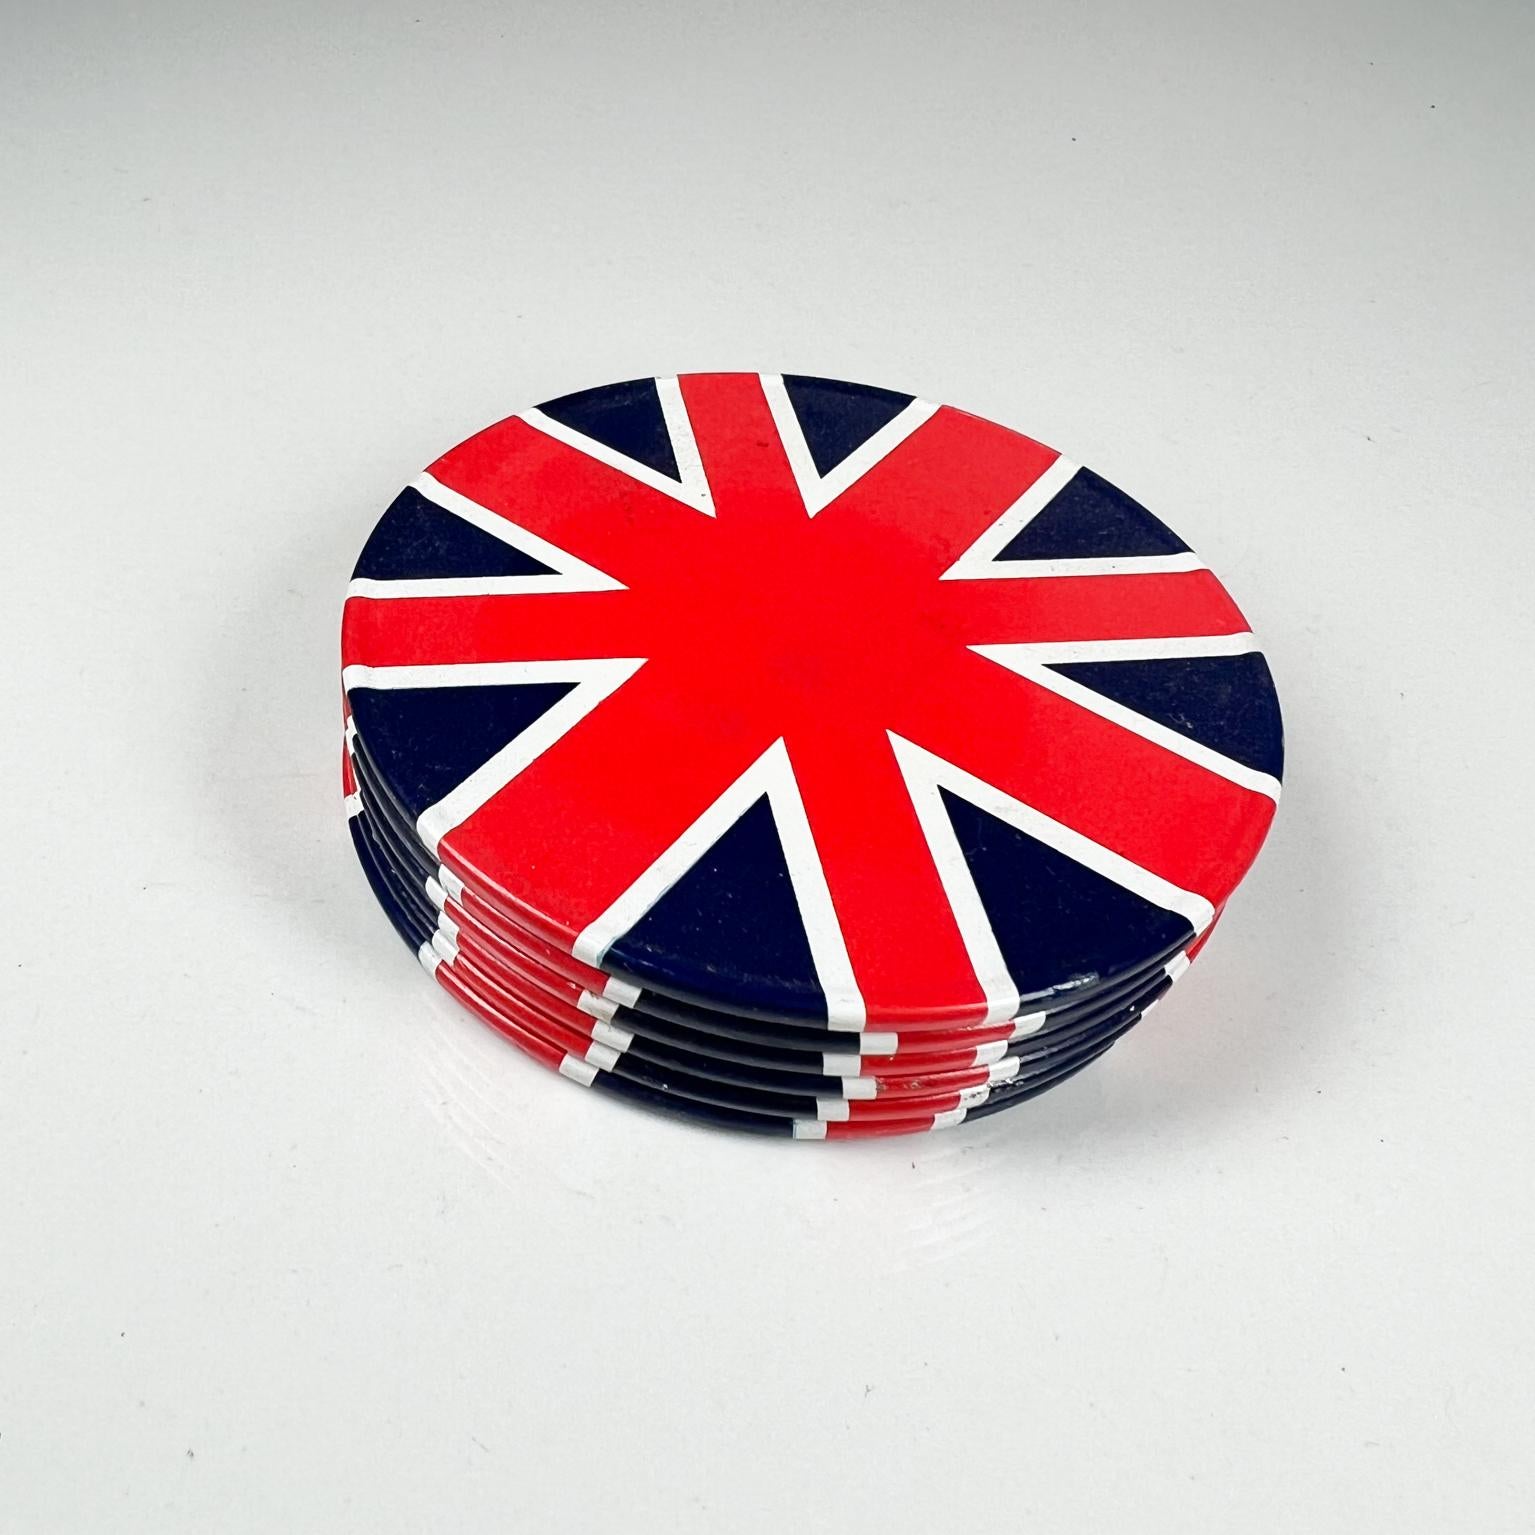 1960s UK Vintage British bar coasters union jack set of six
Cork Backside
3.5 diameter x .1.3 tall
Original preowned vintage condition
See images please.
 